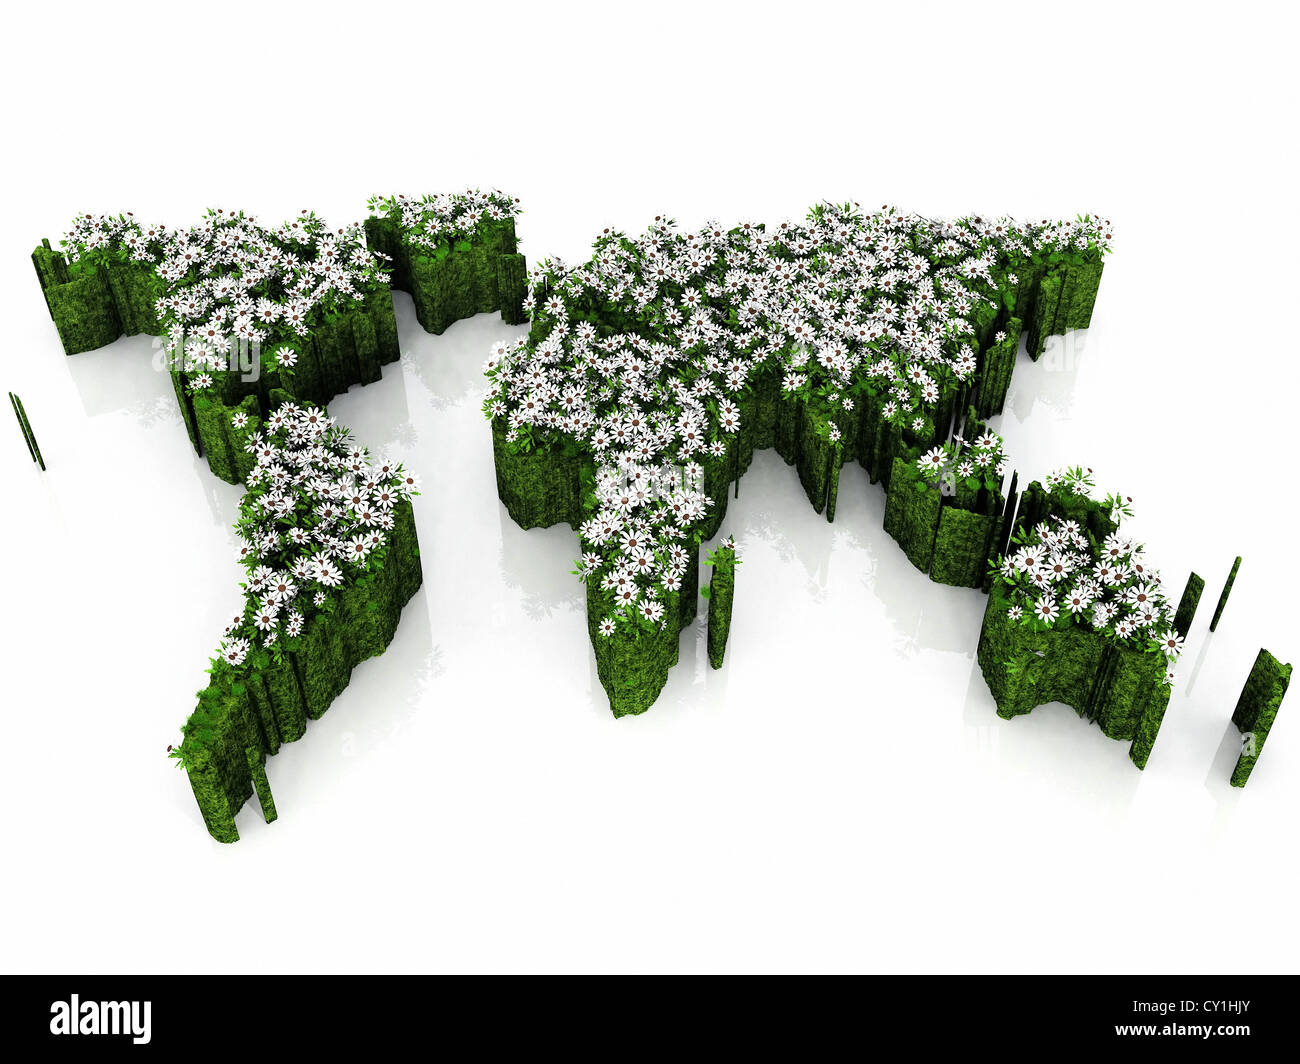 Earth map with grass and flowers Stock Photo